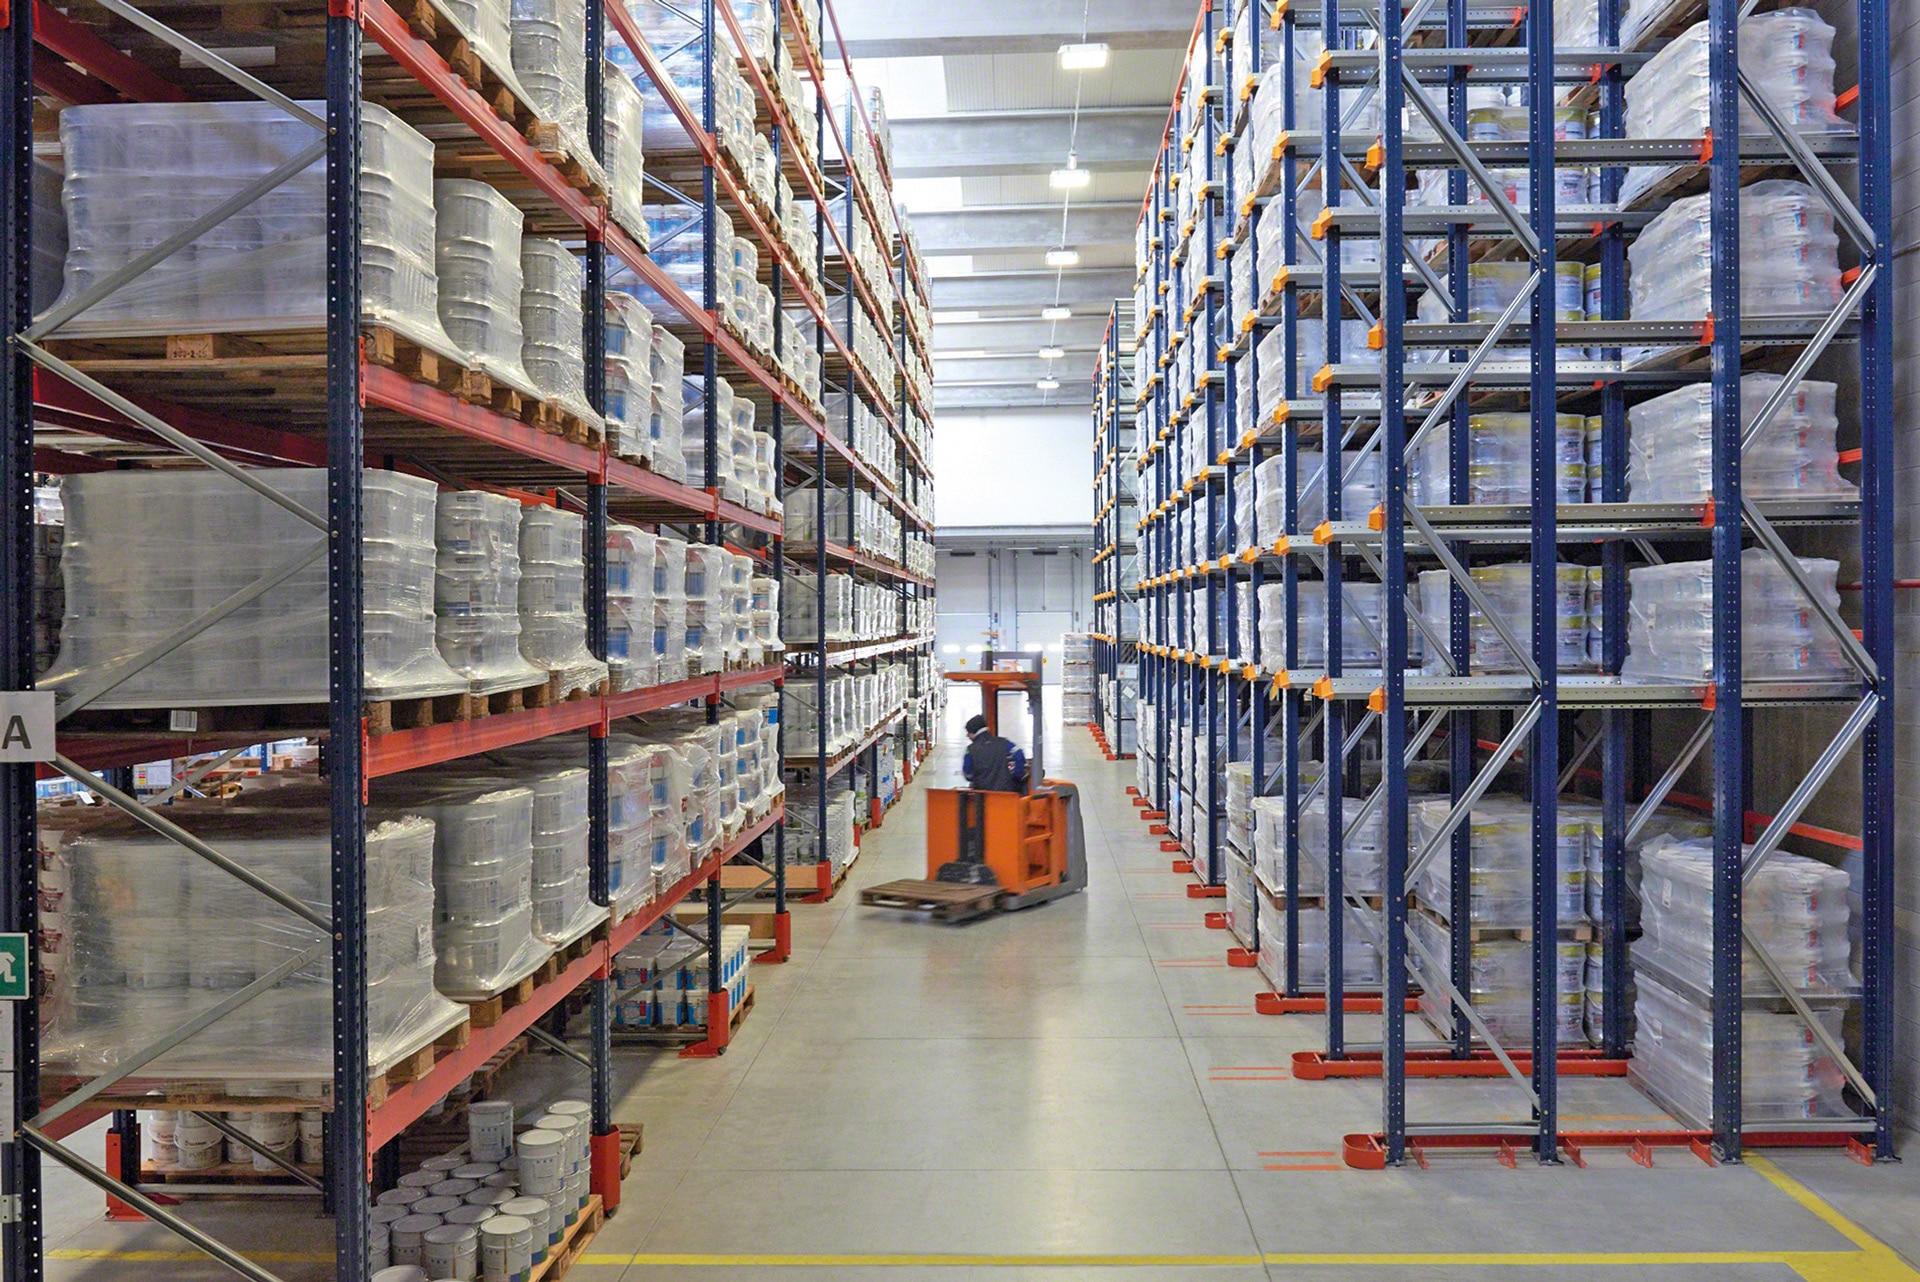 In order to optimize the operation of a warehouse, drive-in racks tend to be combined with other storage systems